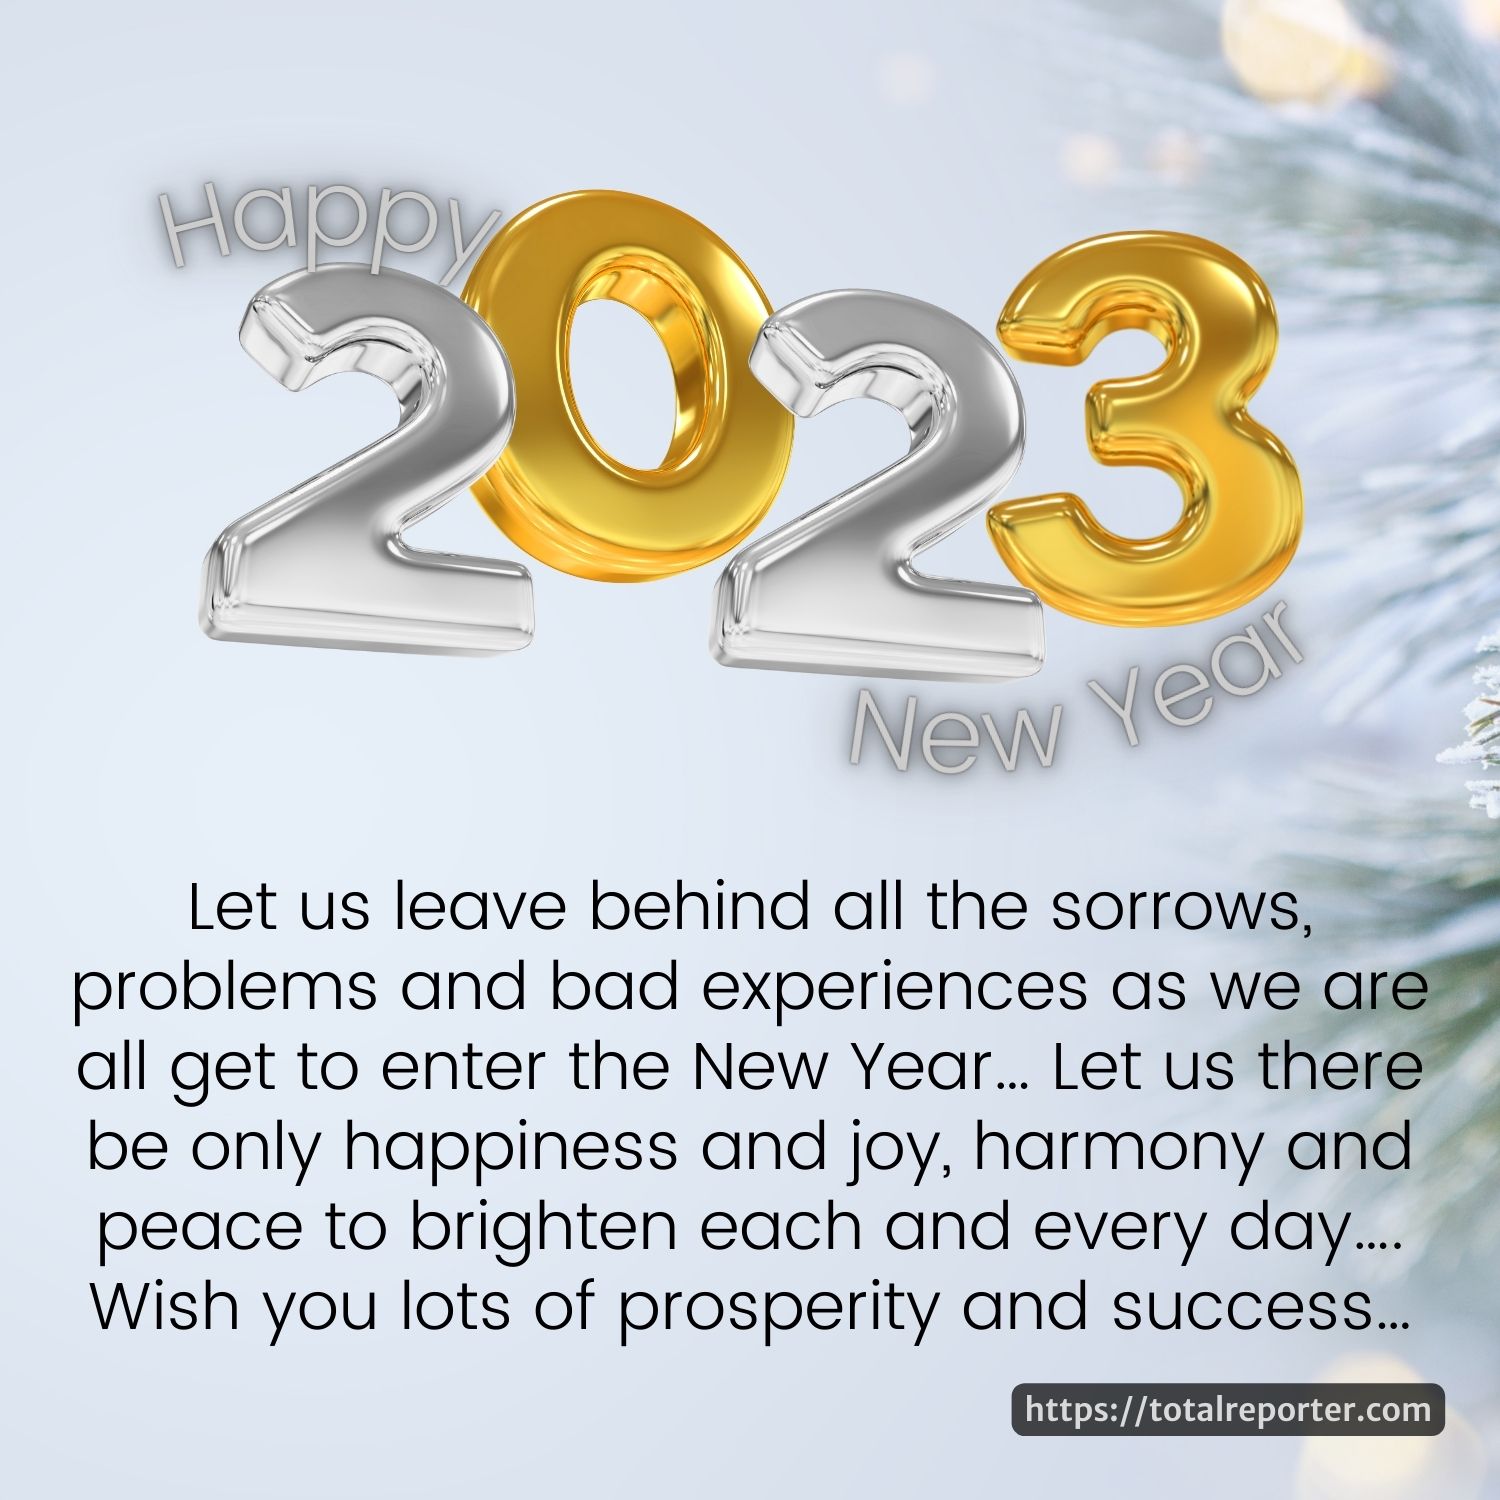 Happy New Year wishes Image